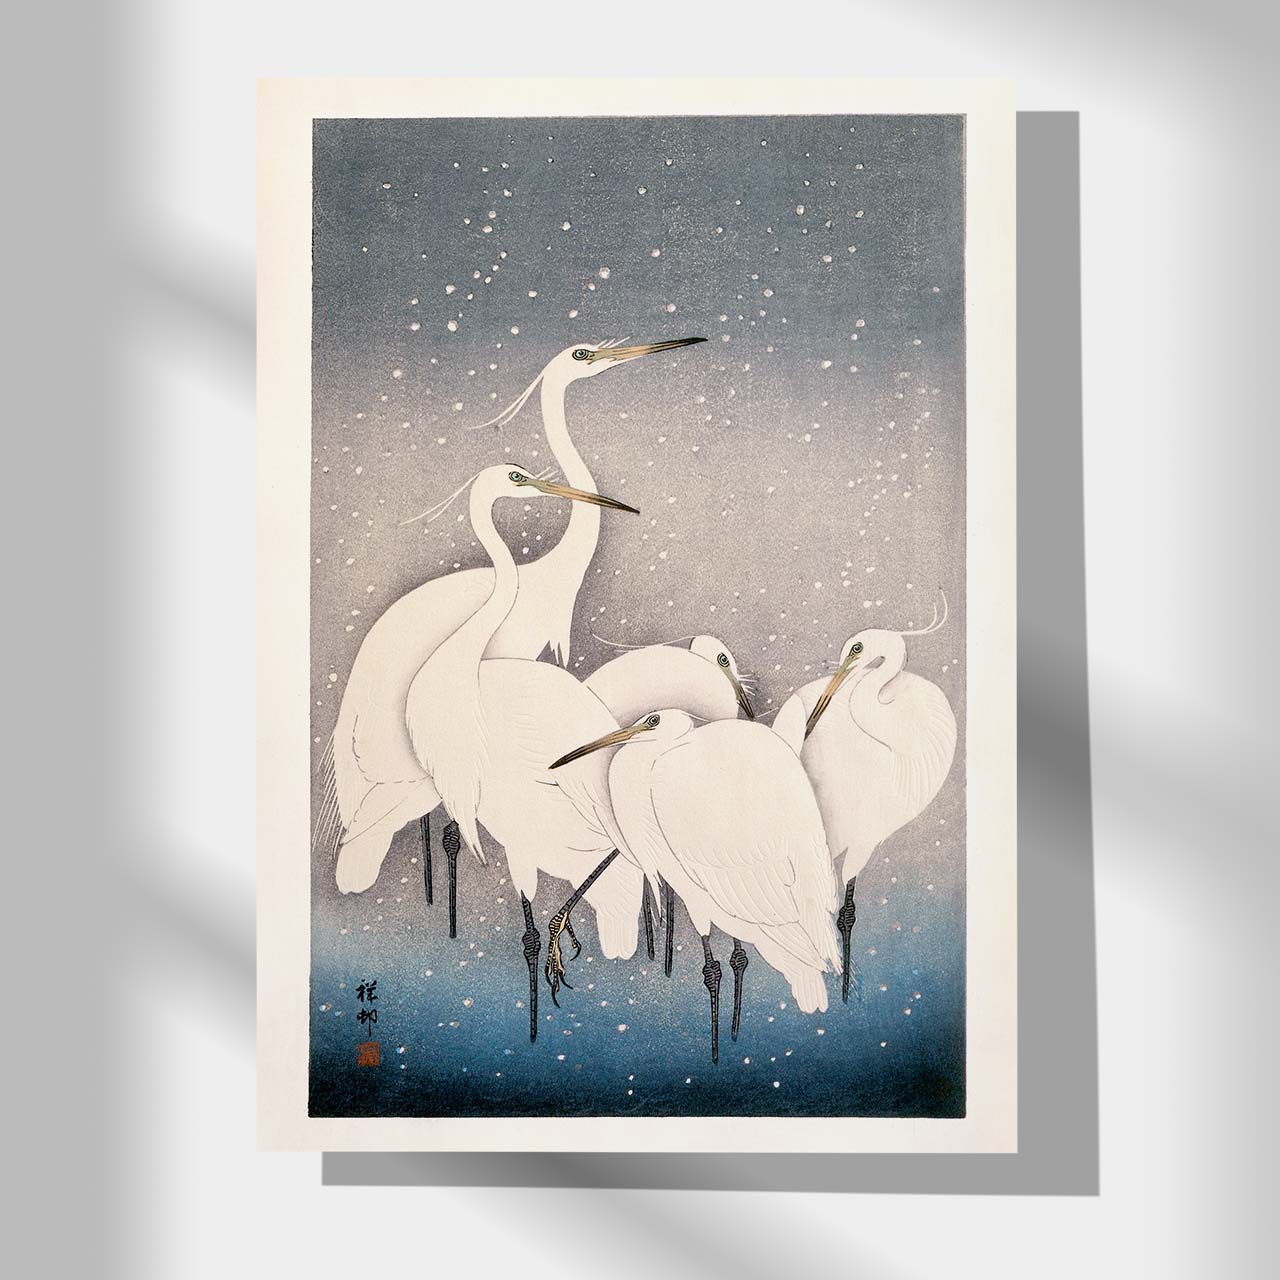 Group of Egrets - Japonica Graphic